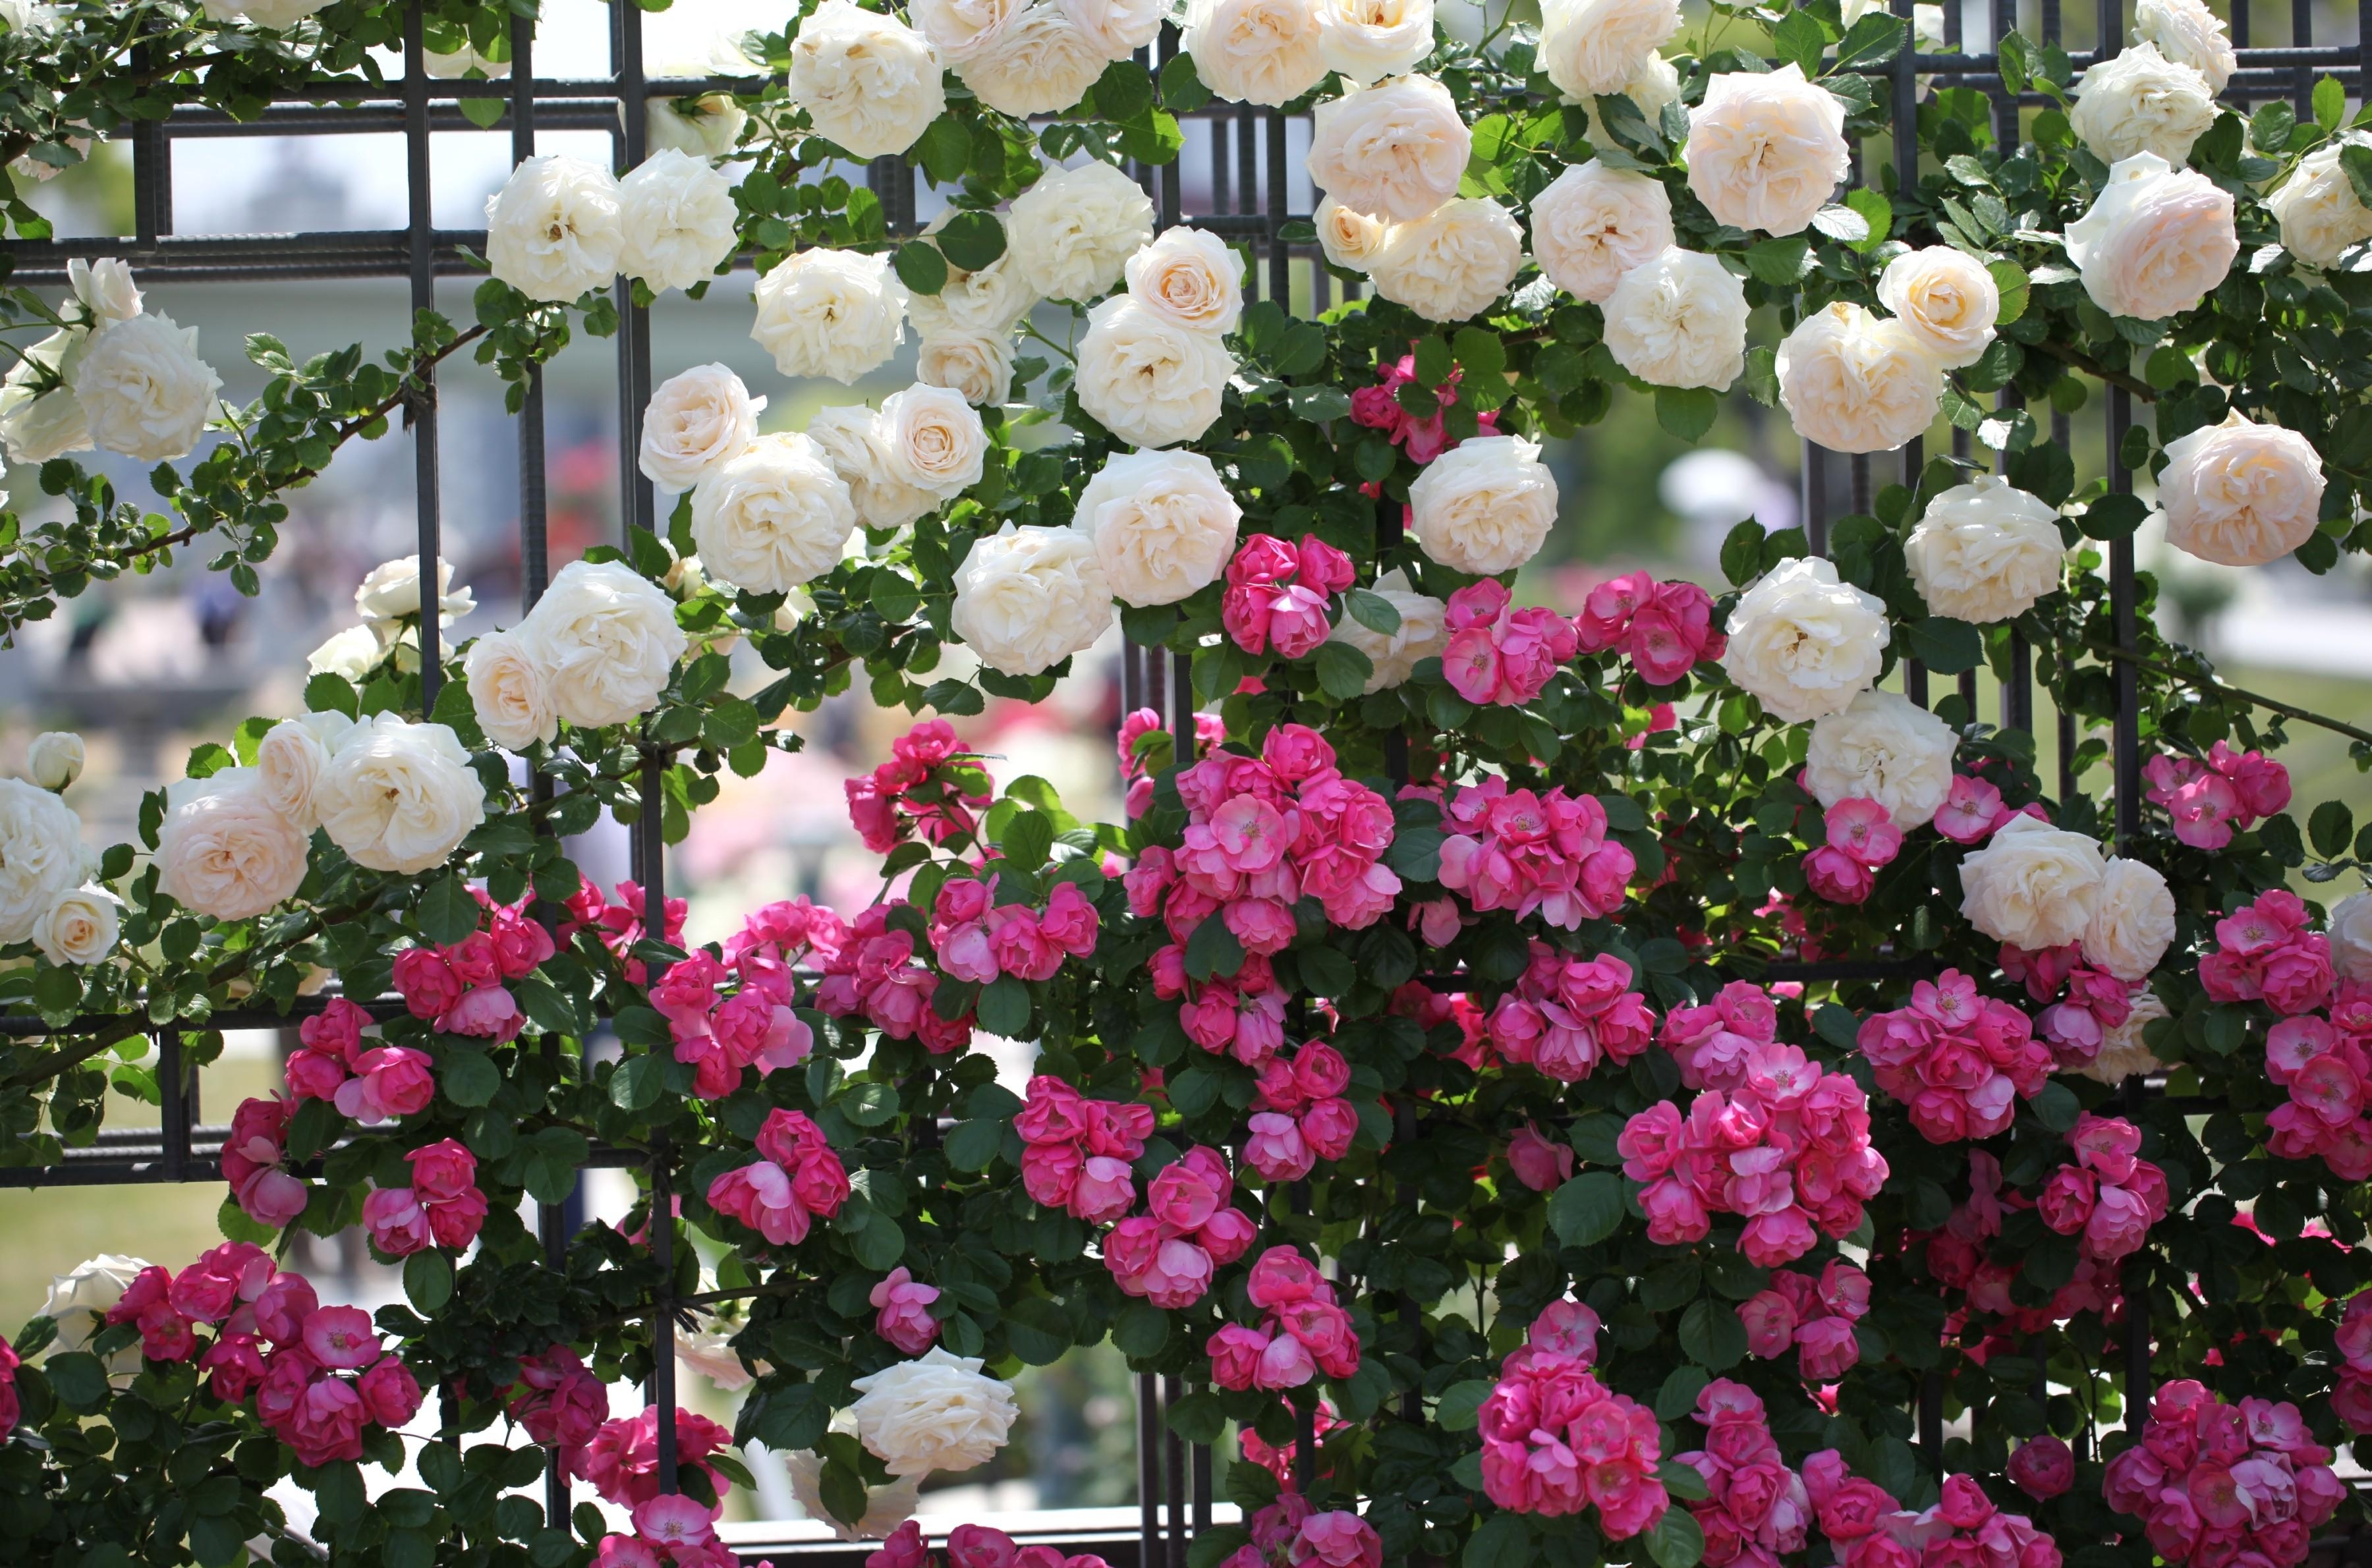 it's beautiful, roses, flowers, greens, fence, handsomely, different QHD